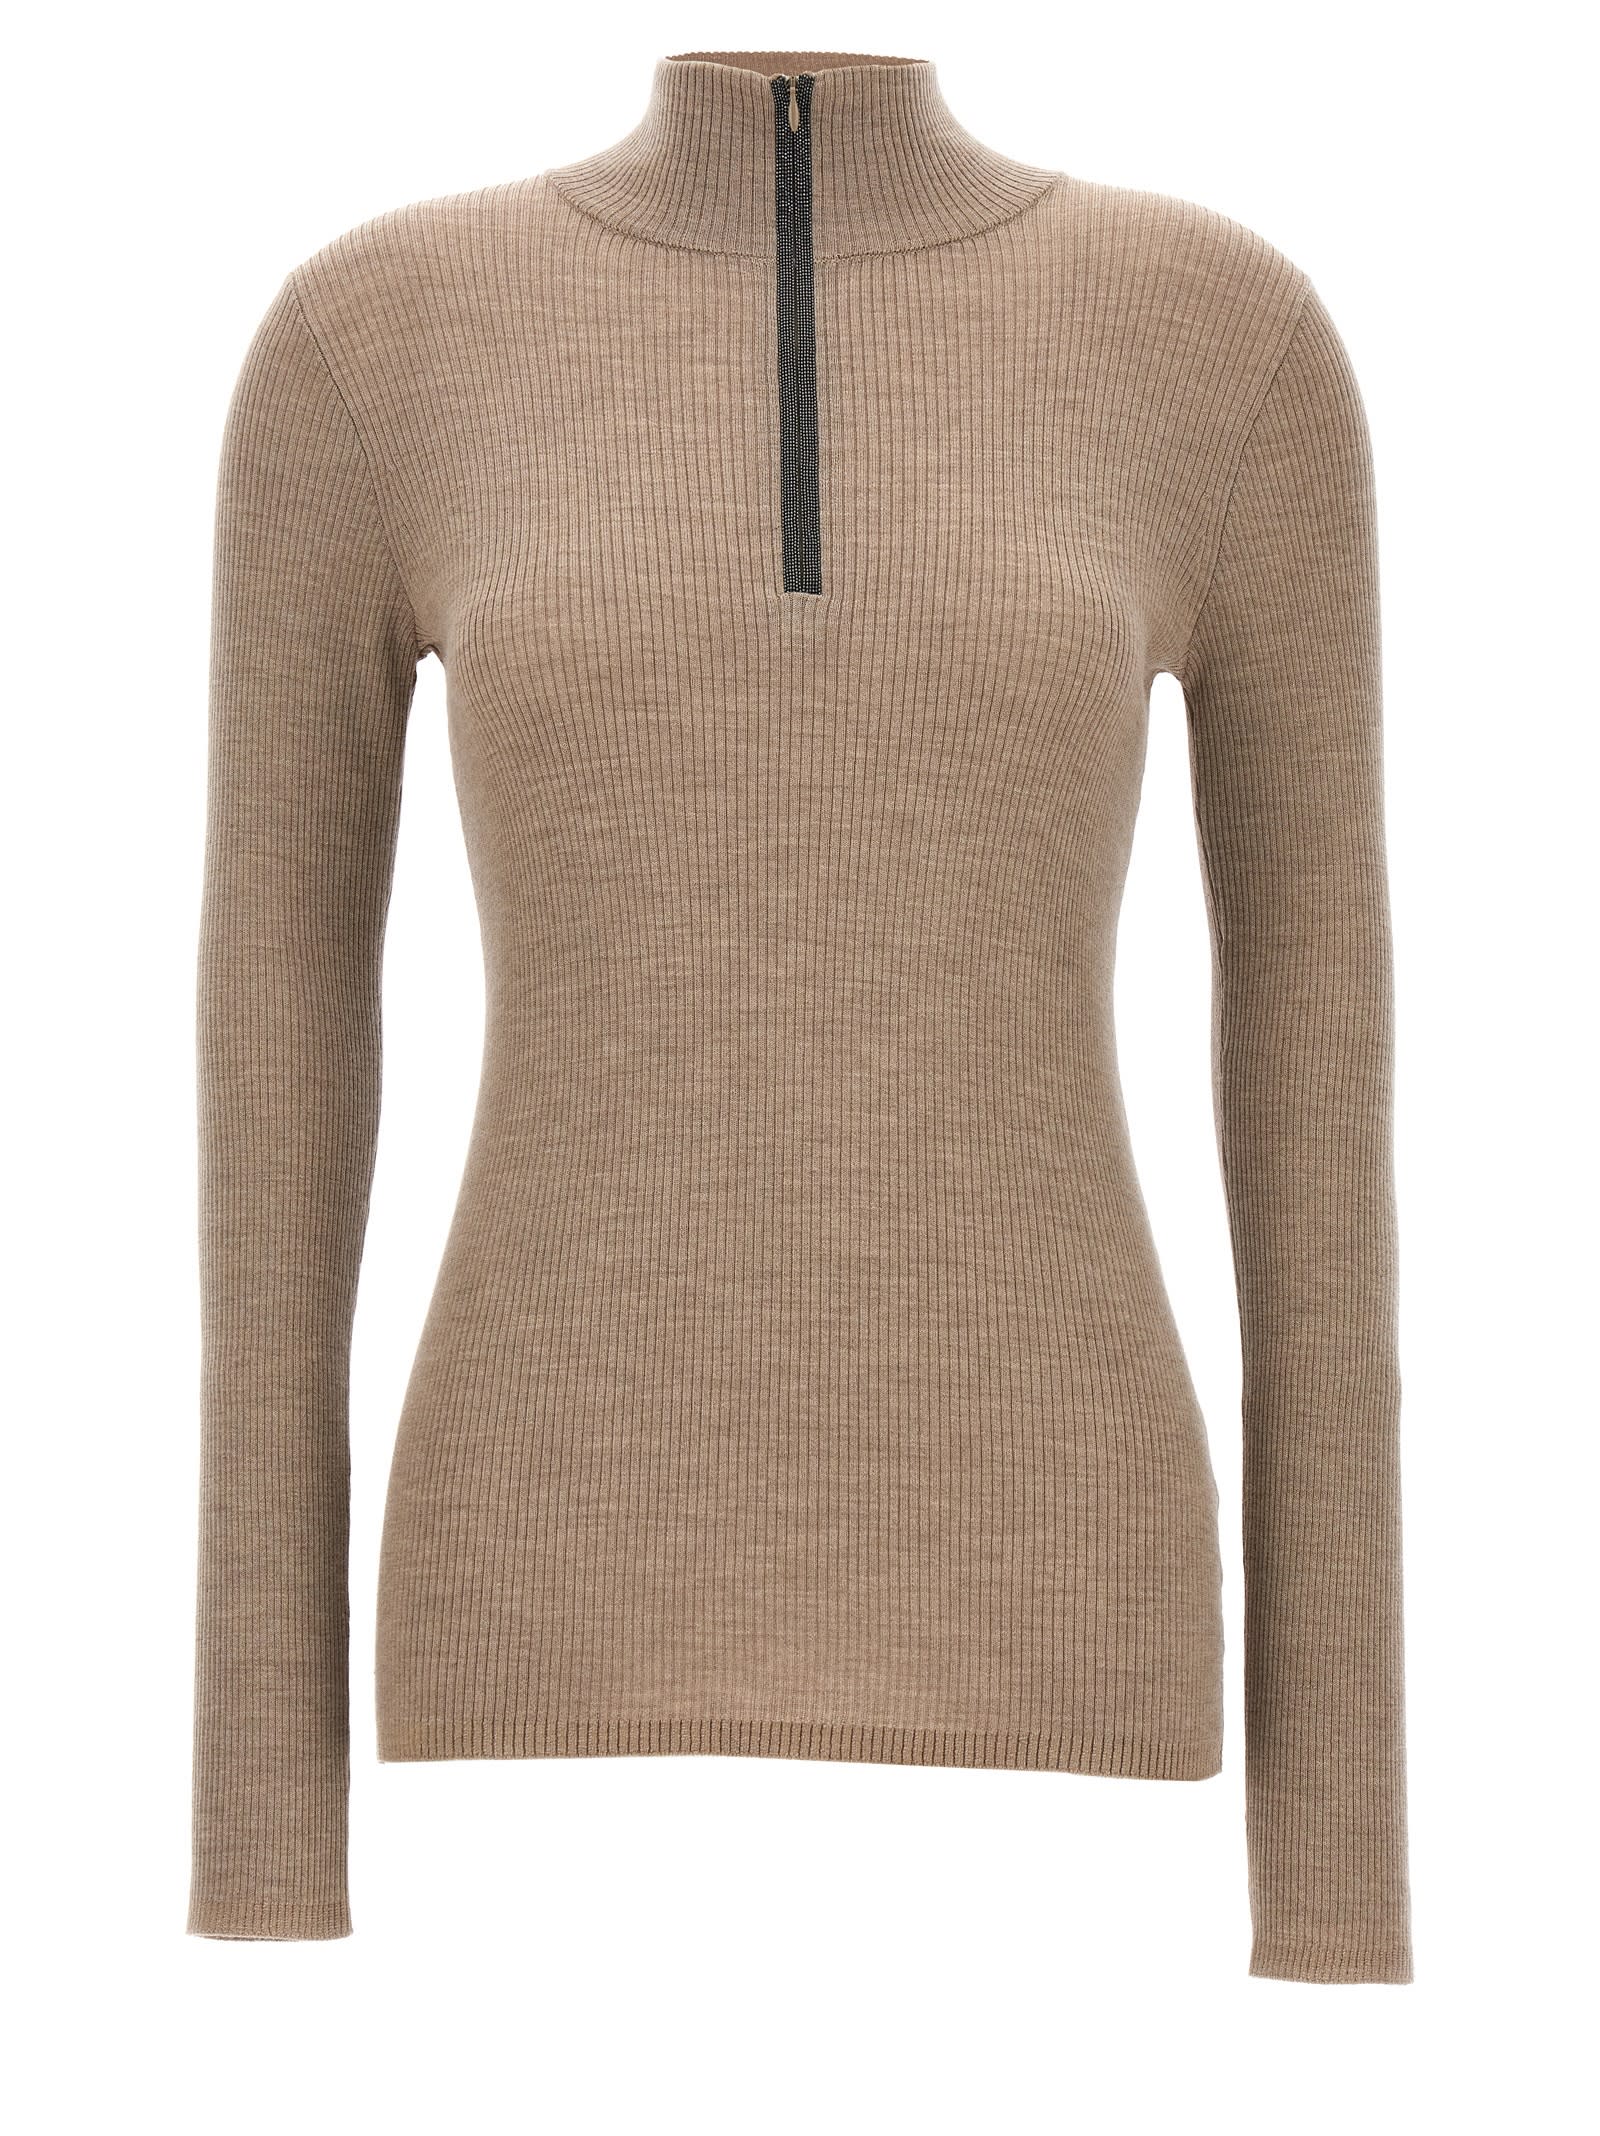 BRUNELLO CUCINELLI LIGHTWEIGHT RIBBED VIRGIN WOOL AND CASHMERE SWEATER WITH PRECIOUS HALF ZIP